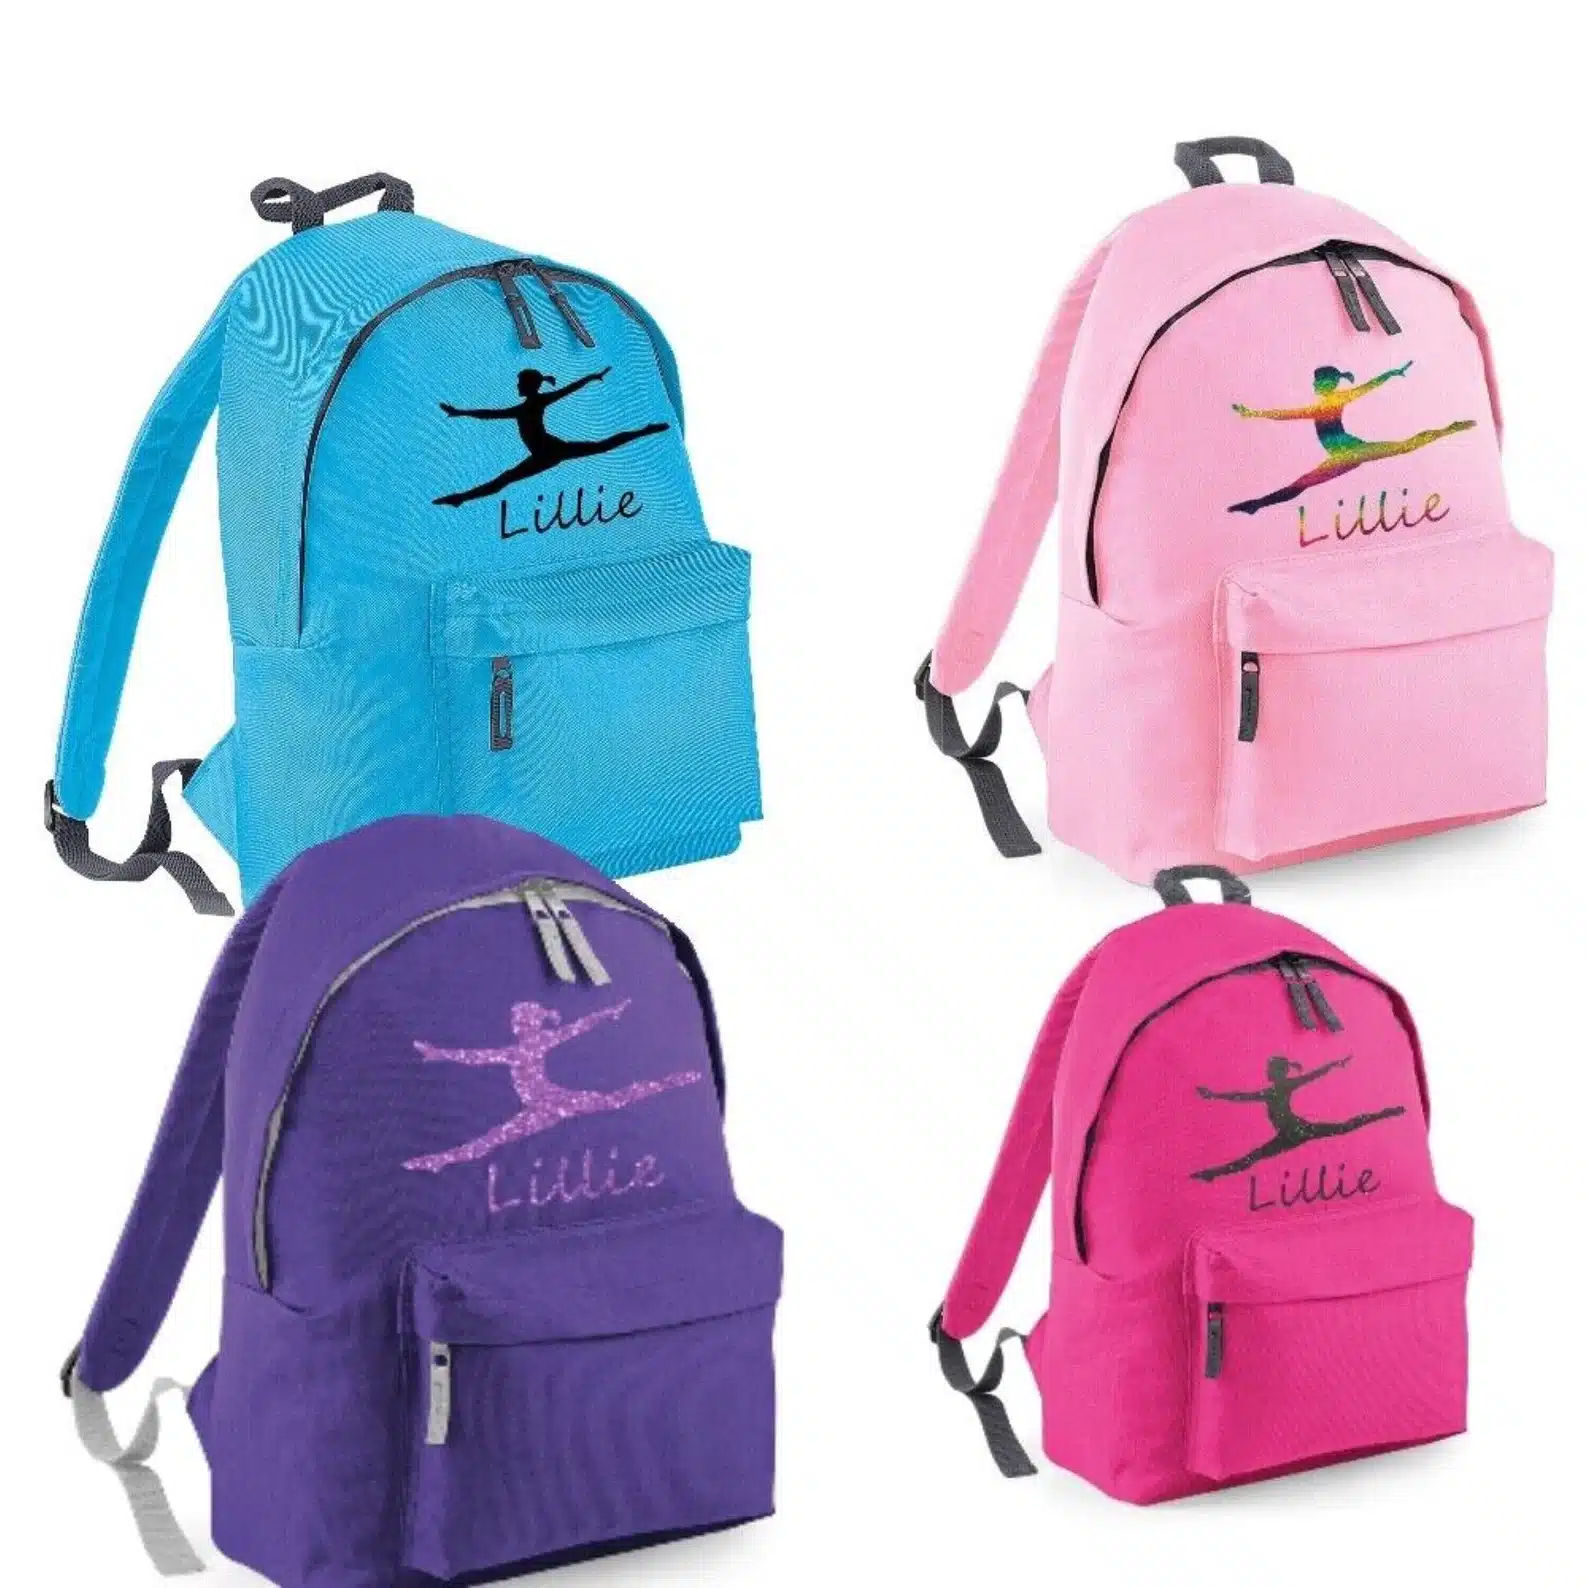 Personalized Gymnastic Printed Backpack